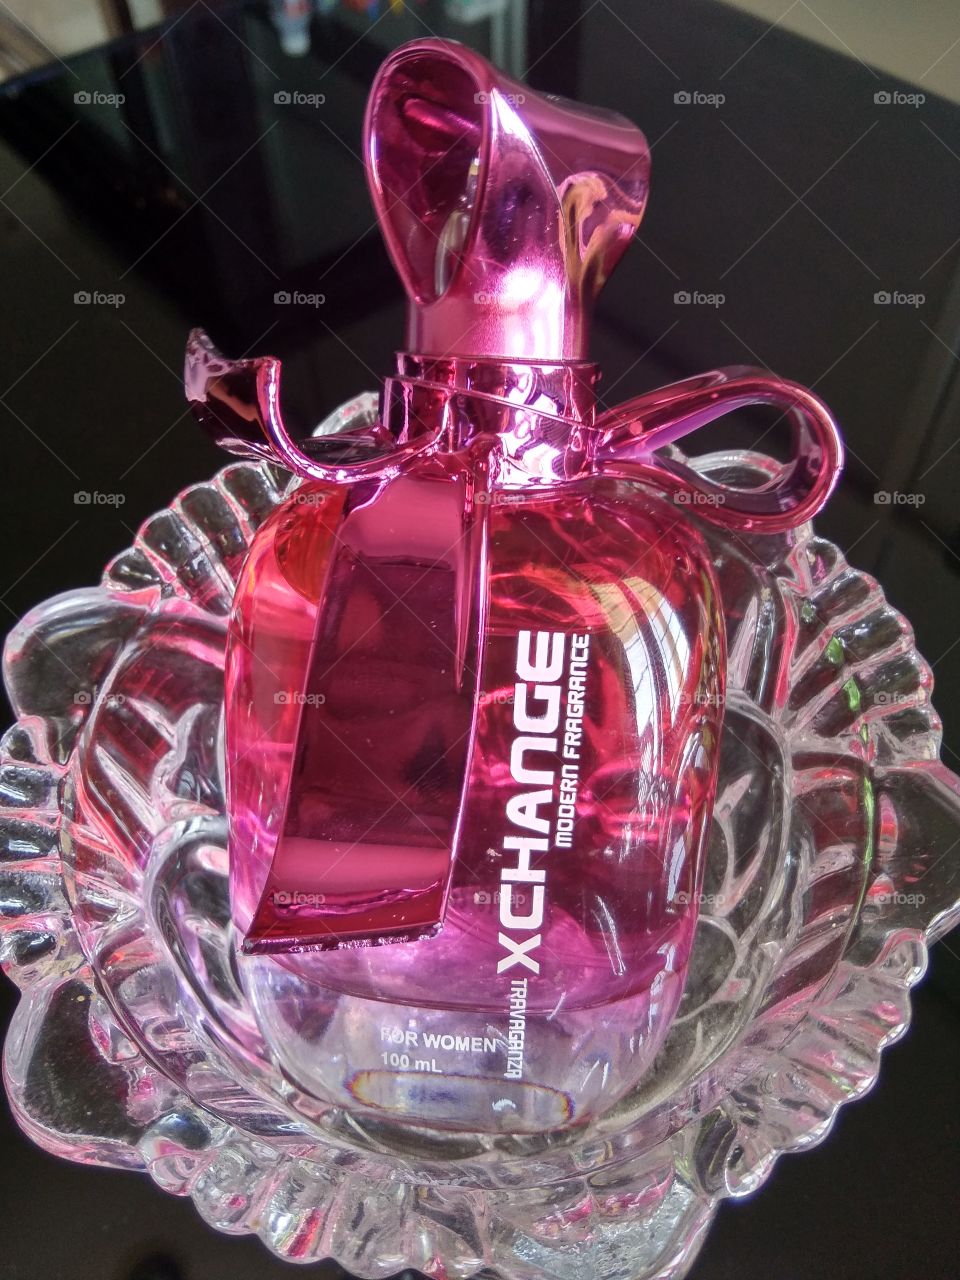 Parfume and it's pink!